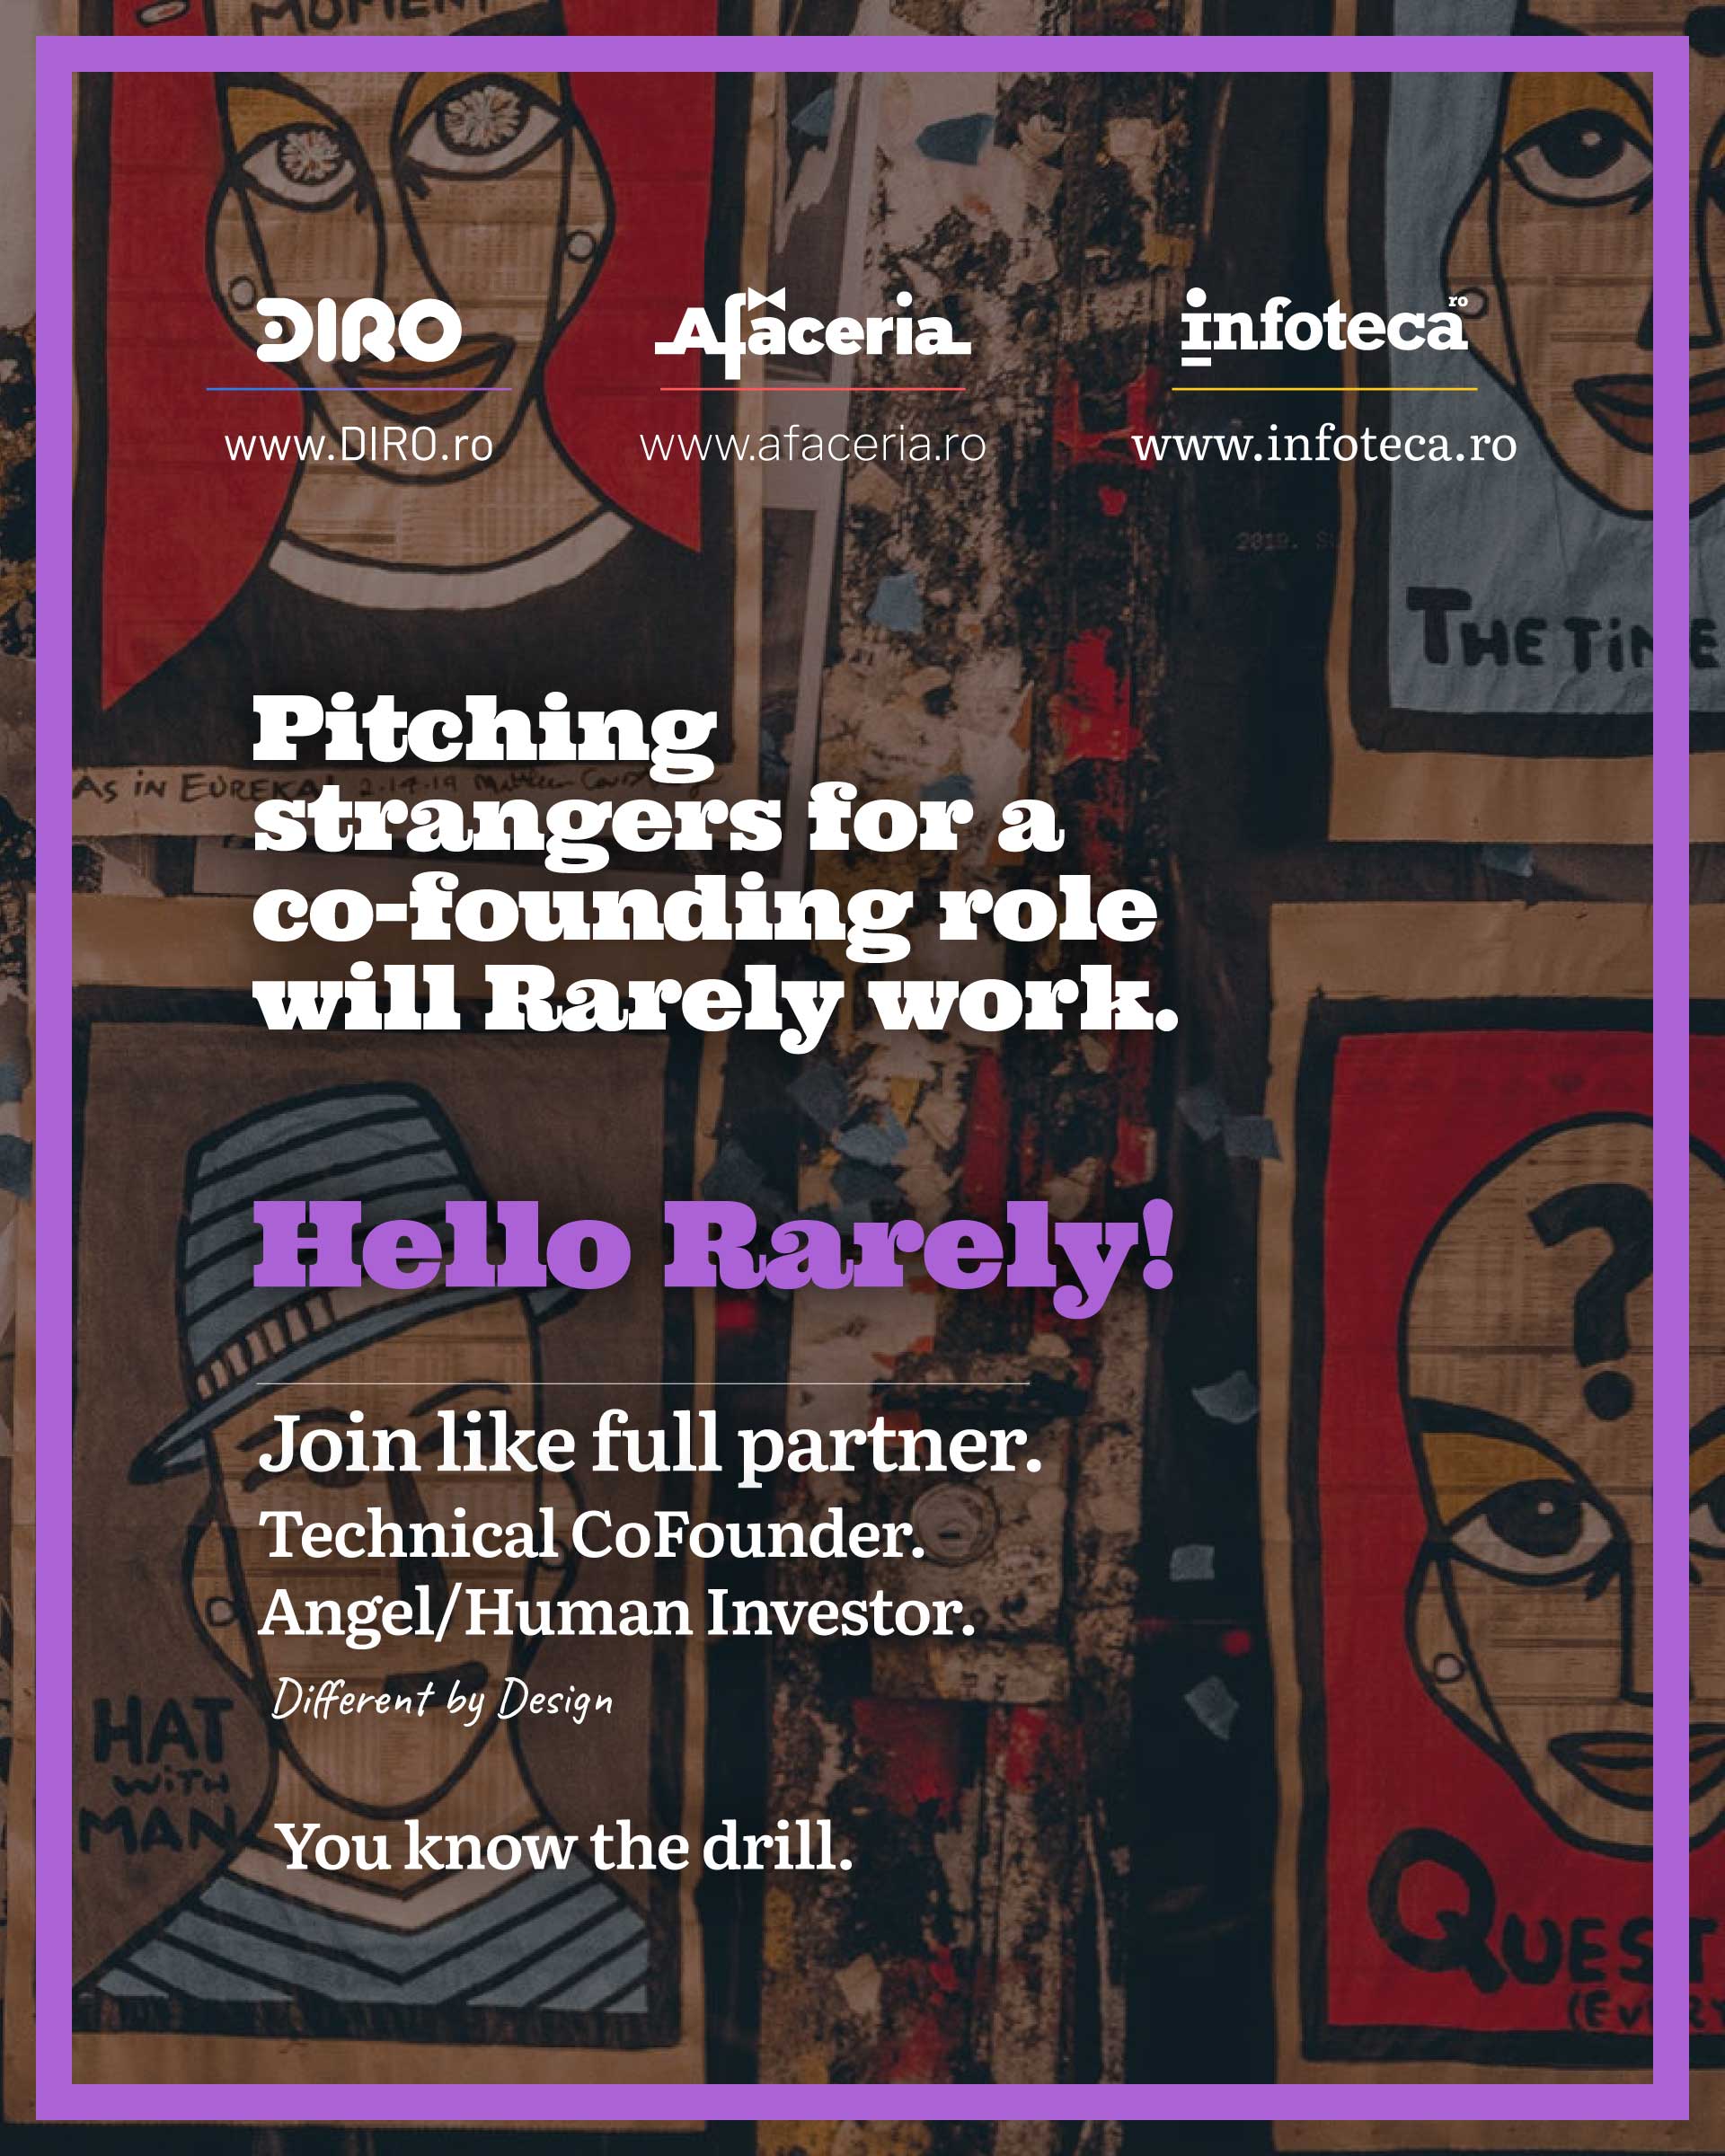 hello rarely by Afaceria, DIRO, Infoteca. Advertising campaign: Pitching for Partners. 